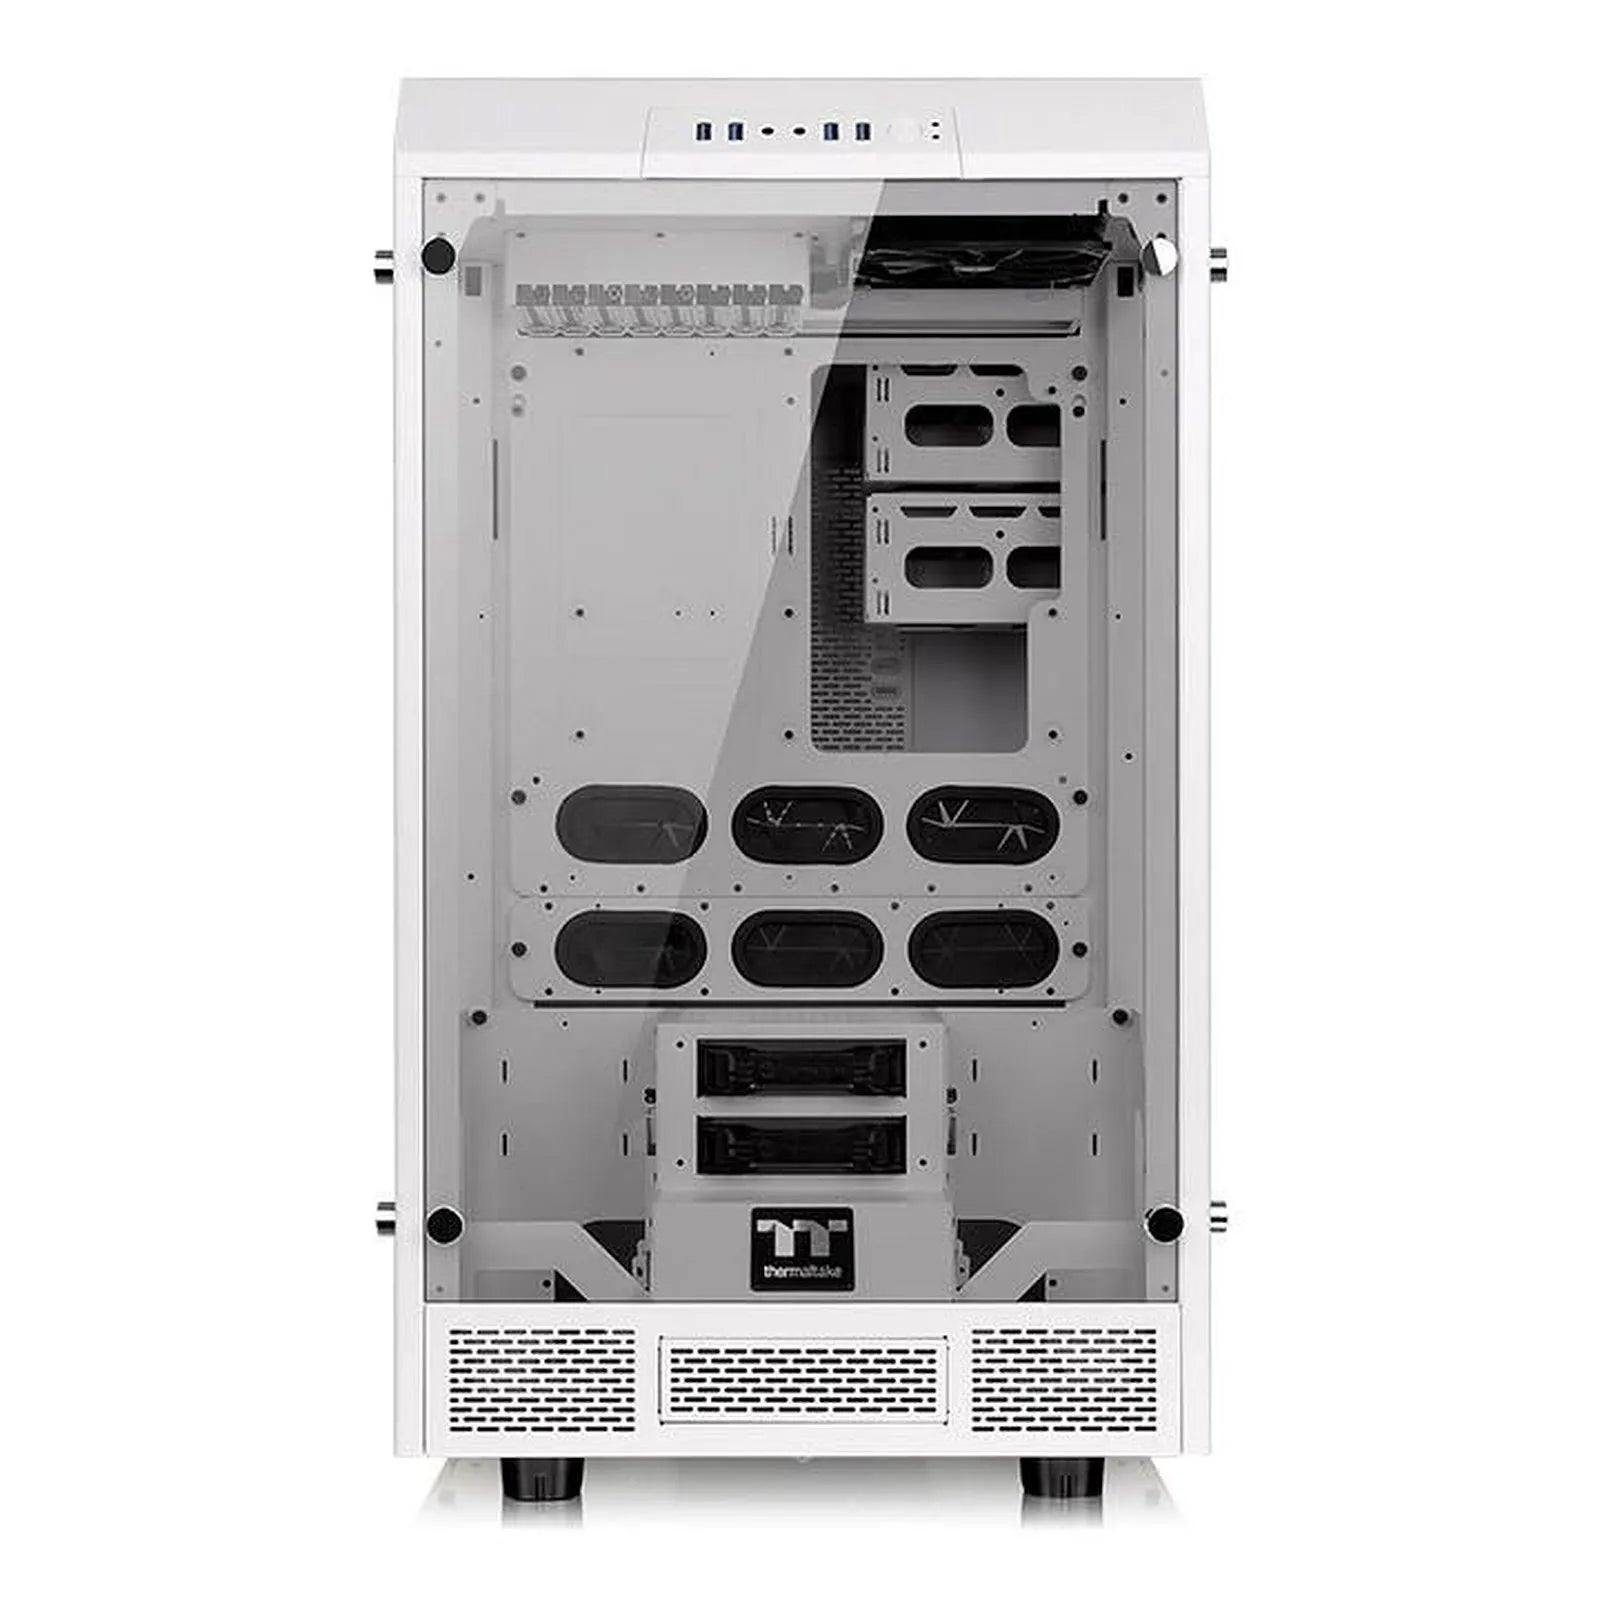 BOITIER THERMALTAKE THE TOWER 900 TG WHITE